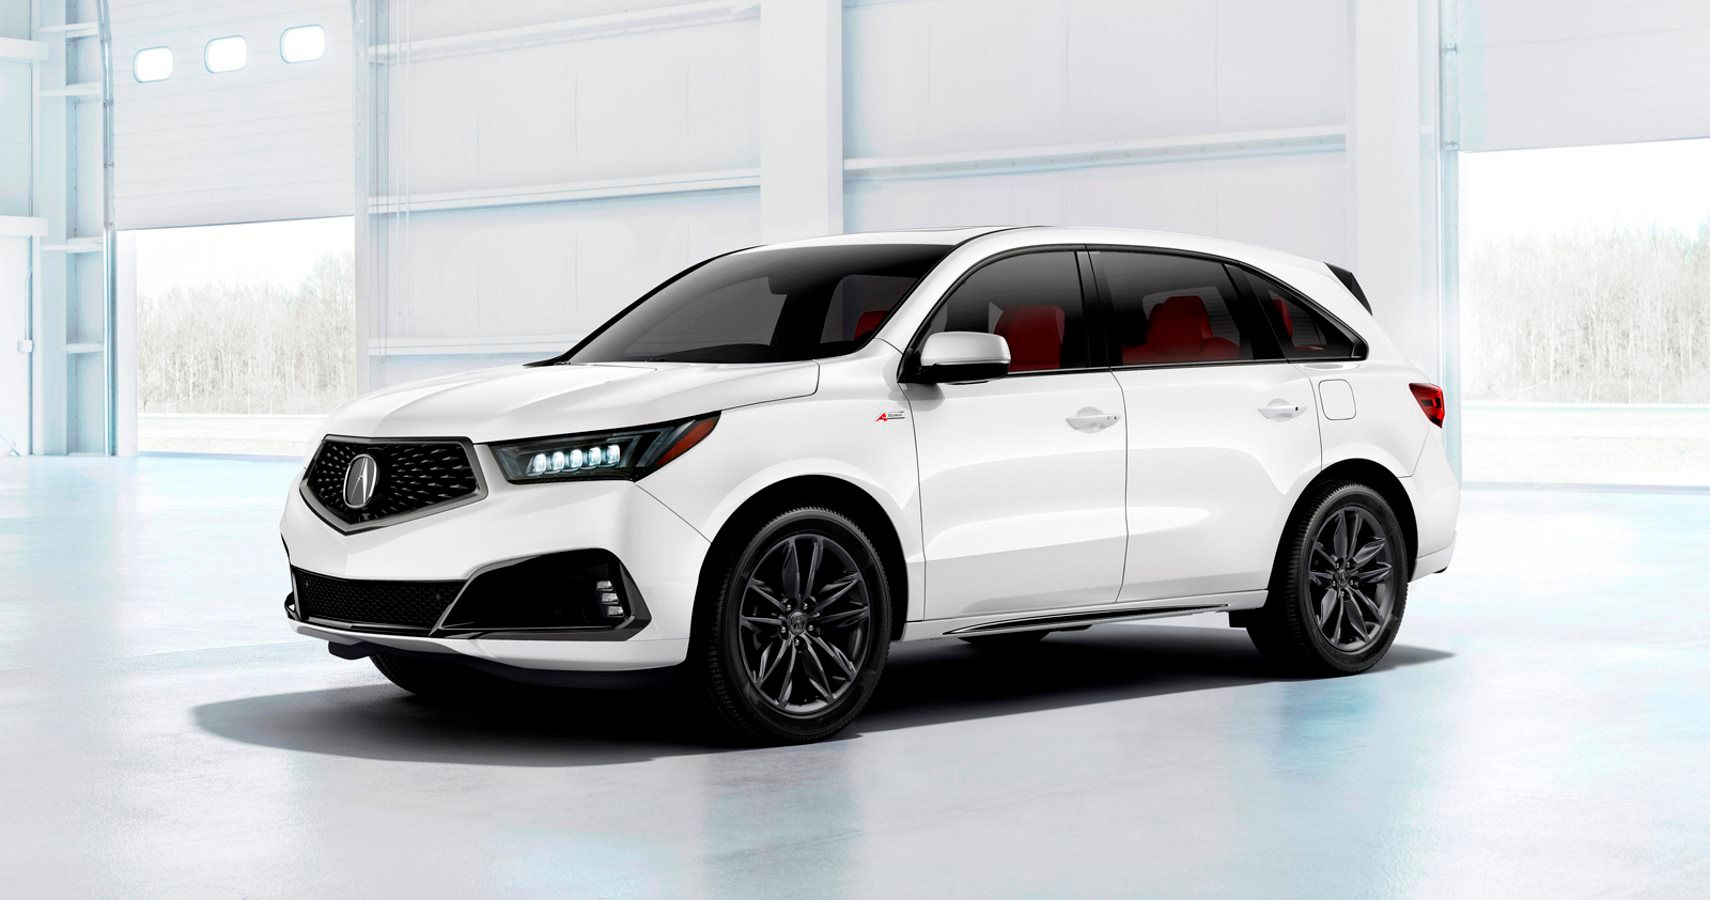 2019 Acura MDX A-Spec: Check Out Acuras Latest Unveiling